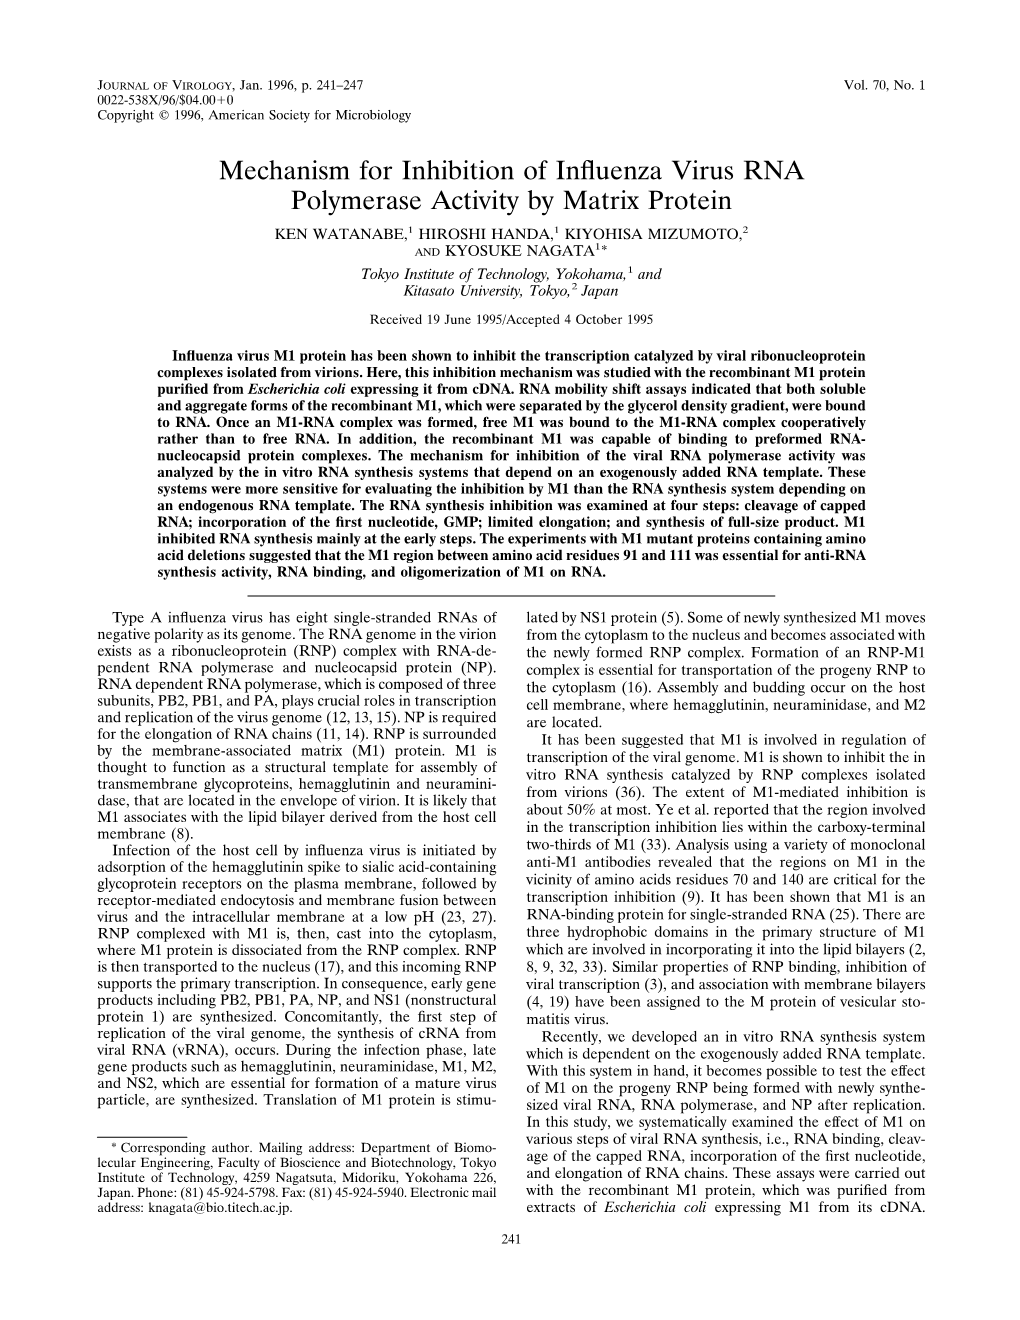 Mechanism for Inhibition of Inffuenza Virus RNA Polymerase Activity By